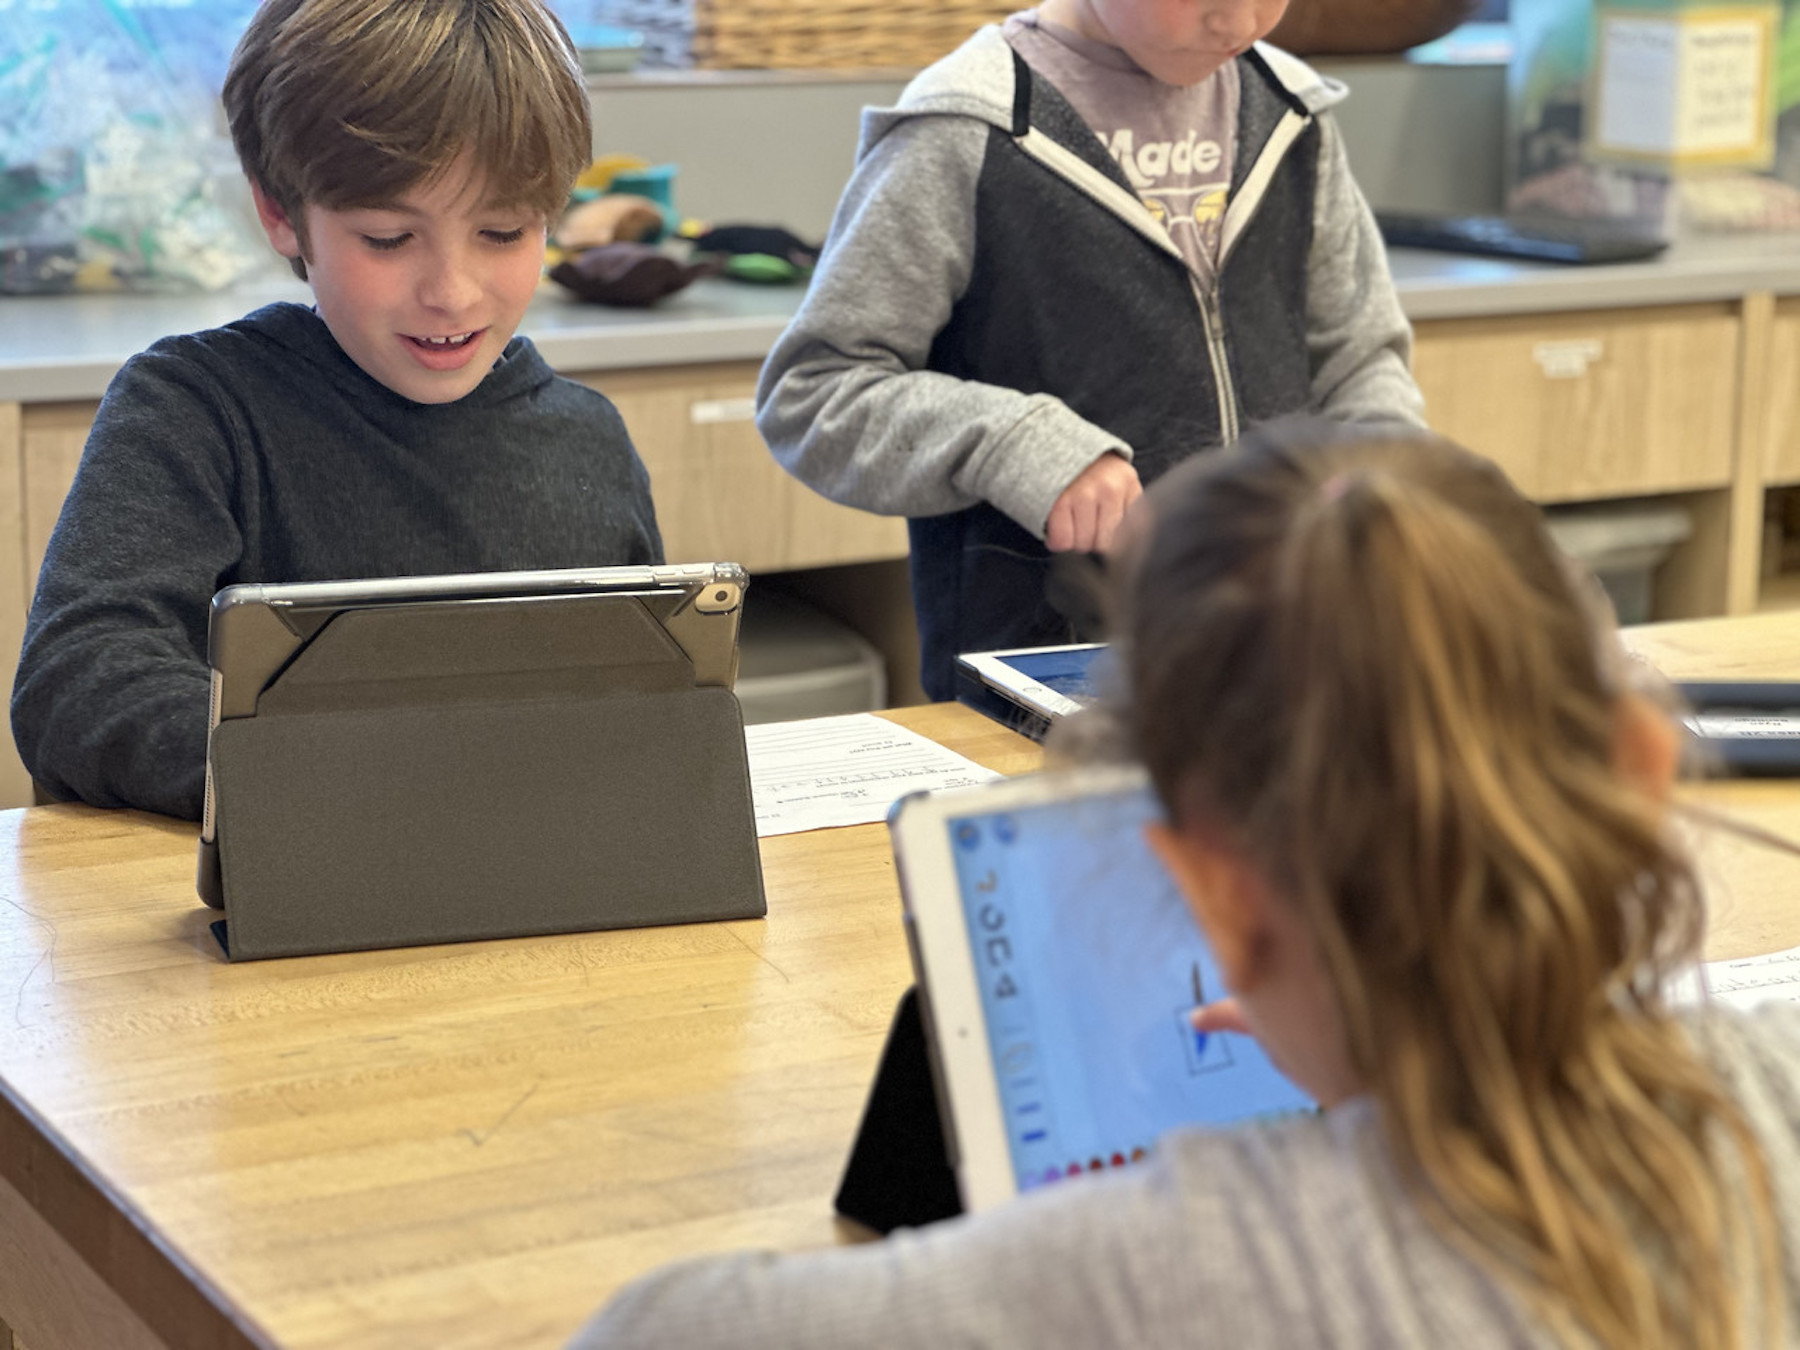 Group of three Fieldston Lower students work together on iPads in classroom.